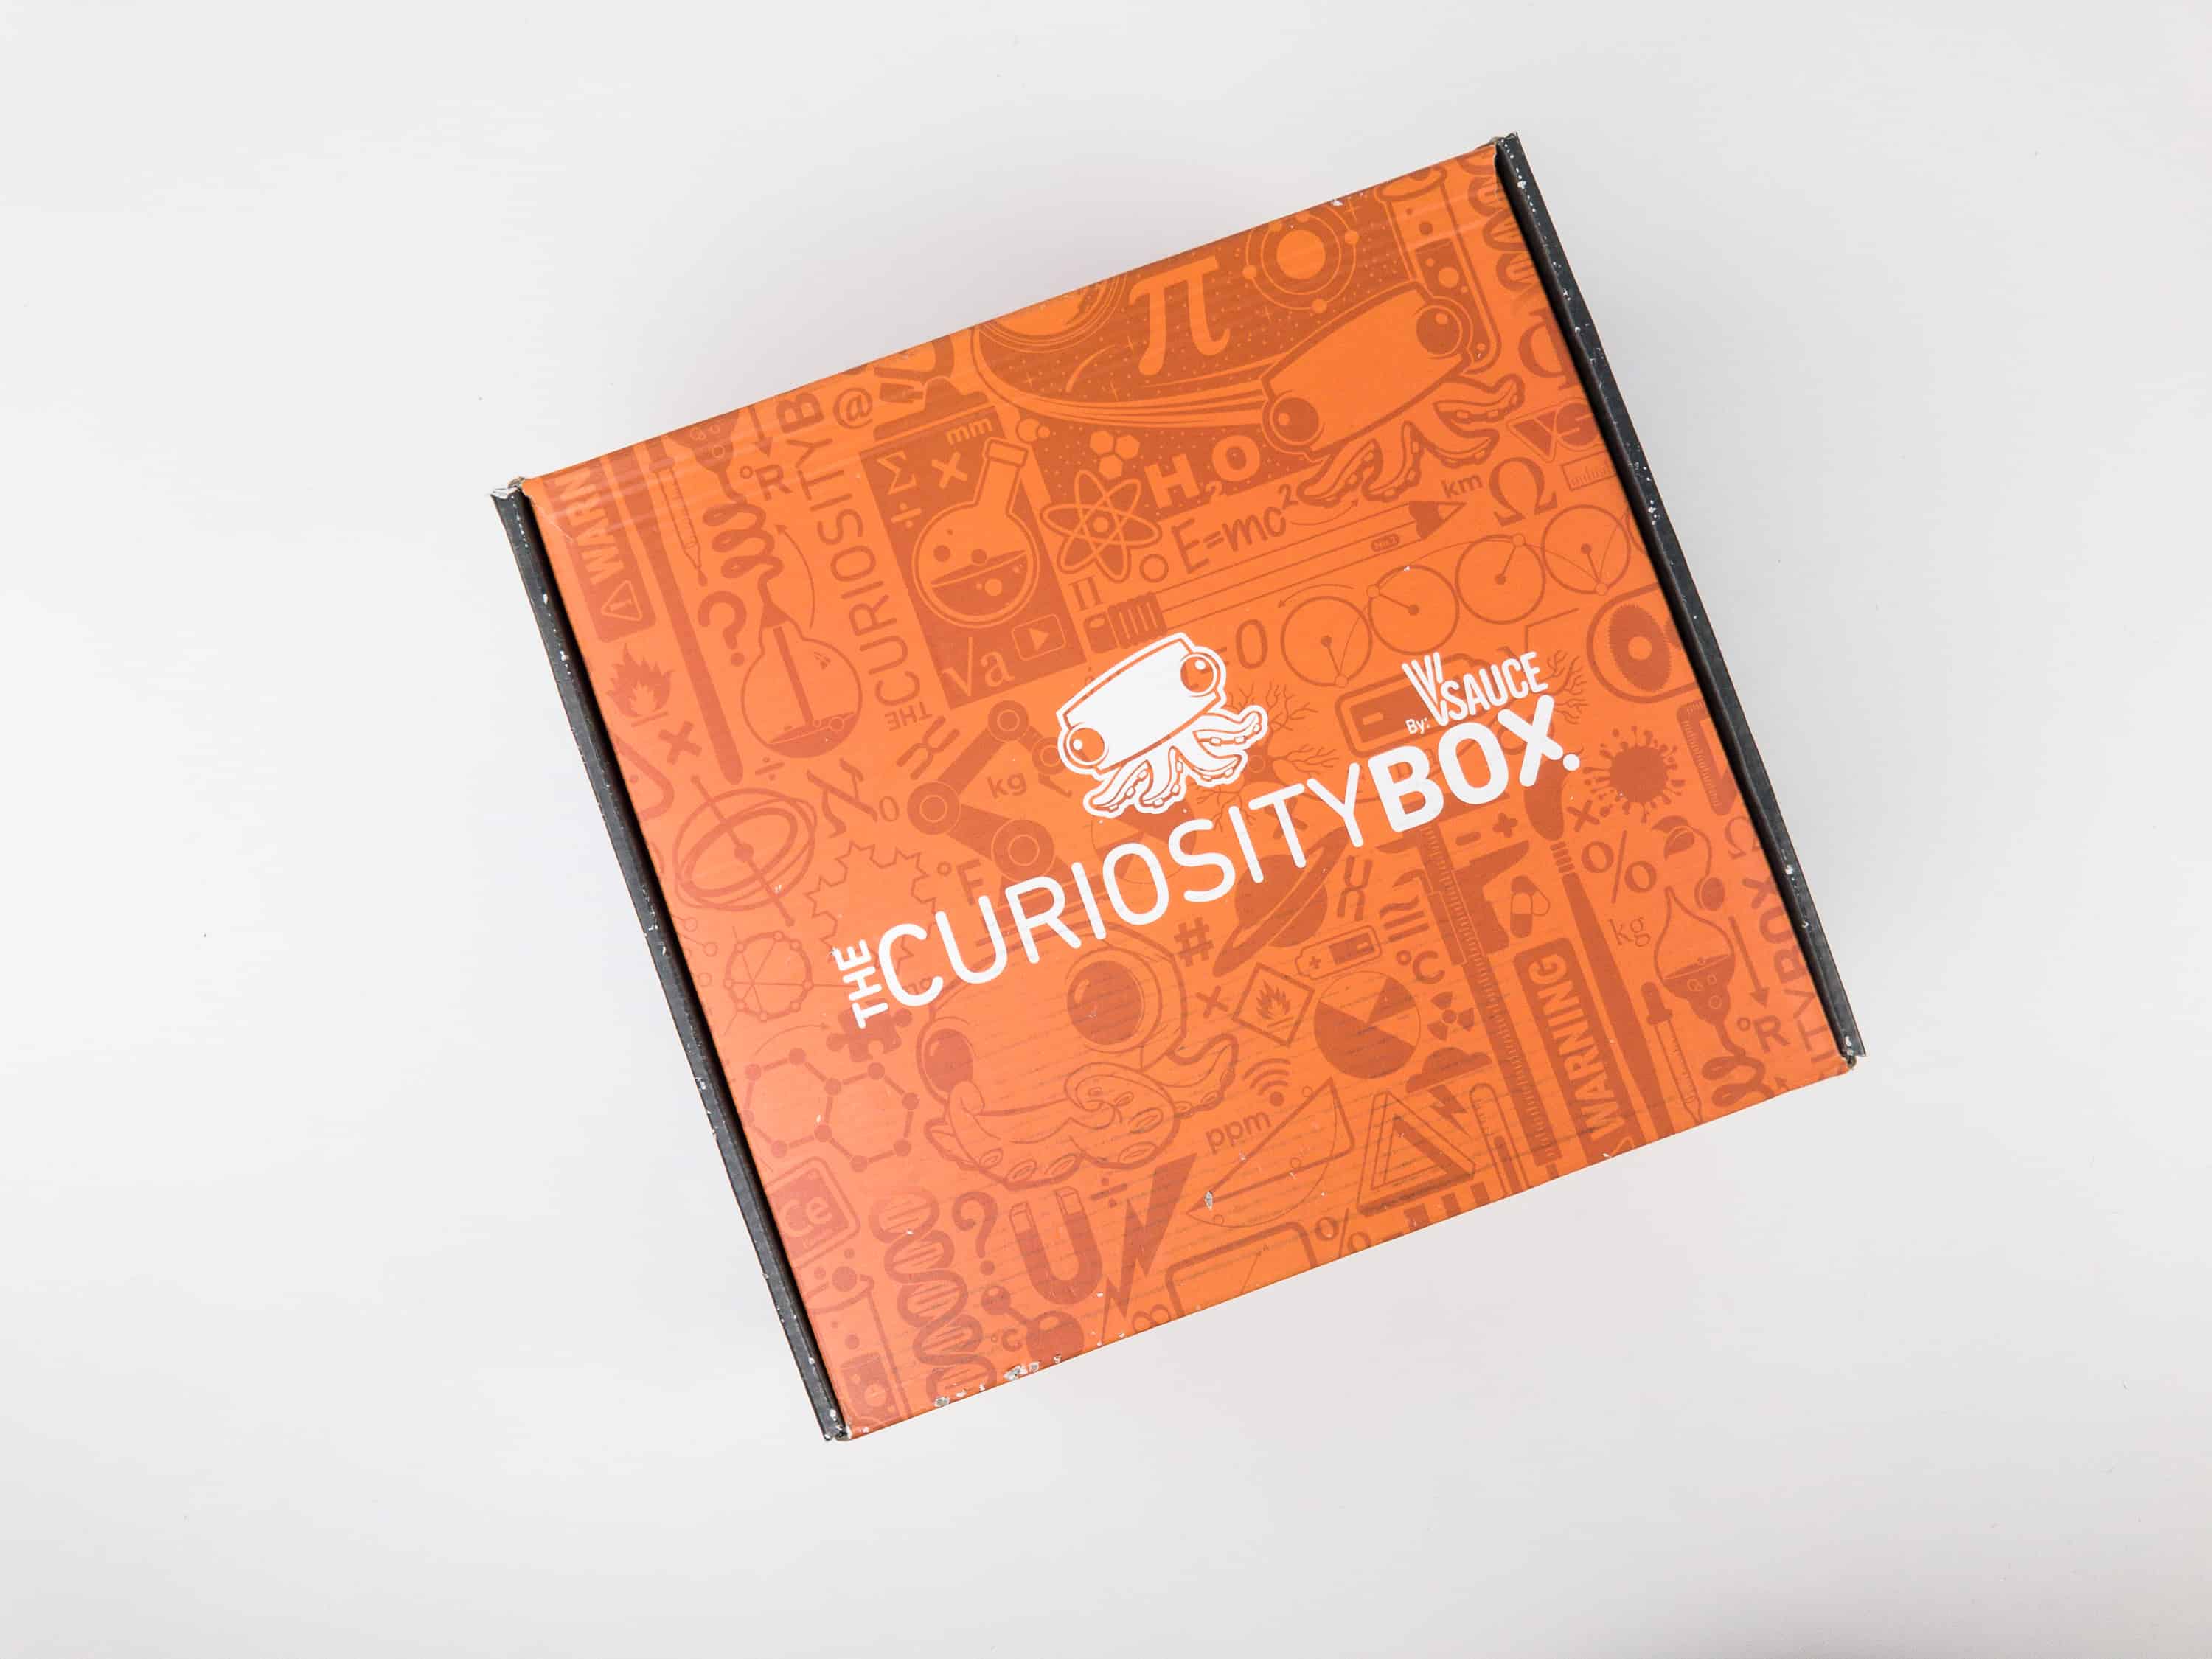 Fully Charged Battery Box • Curiosity Box